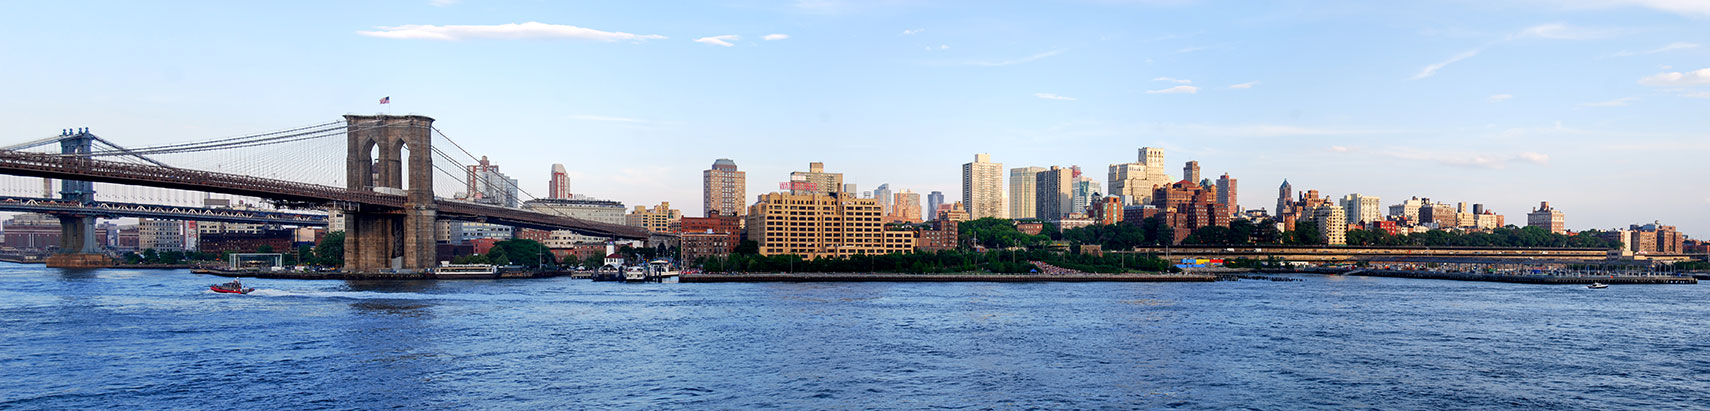 Downtown Brooklyn, view across the East River from Lower Manhattan